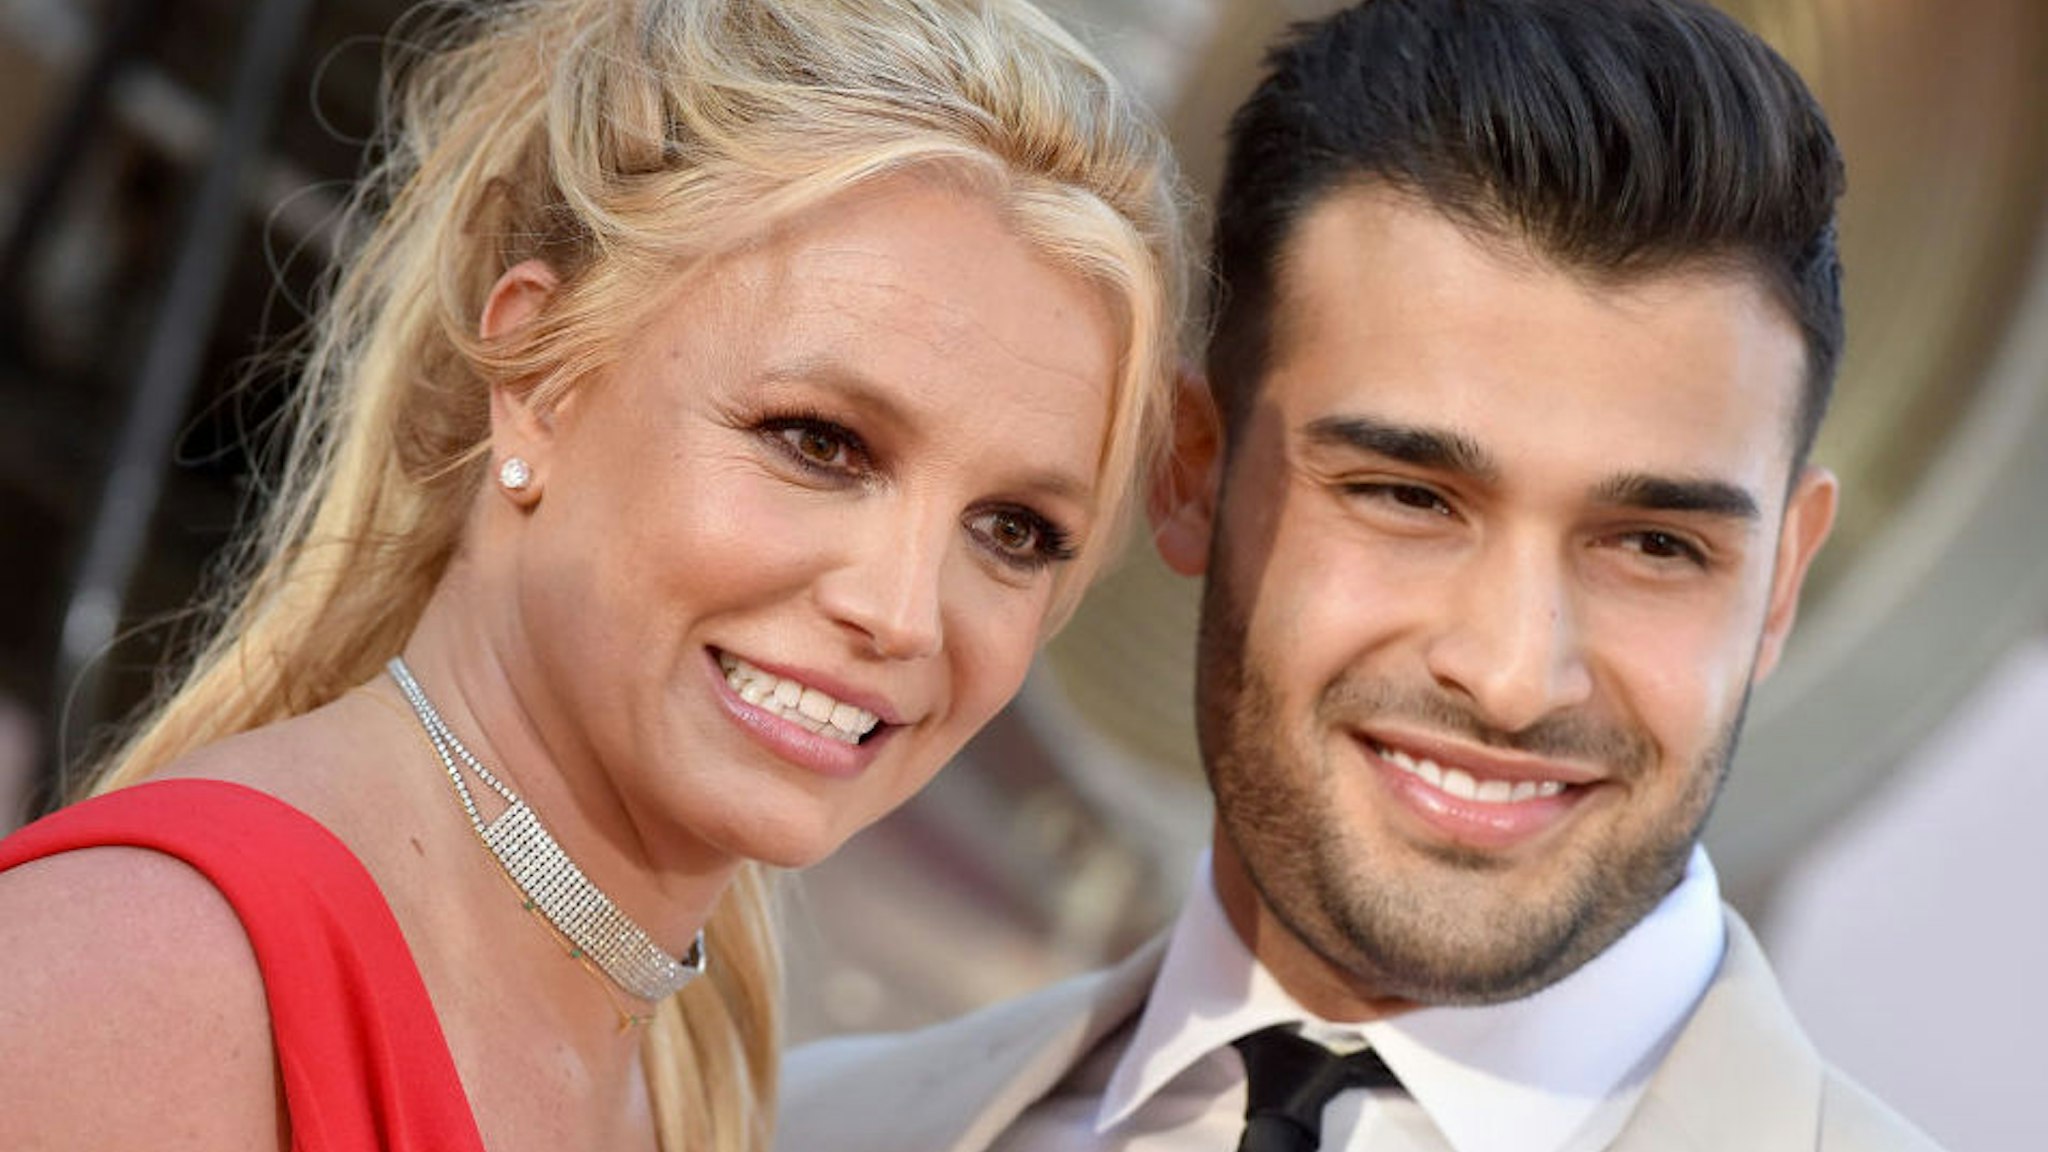 Britney Spears and Sam Asghari attend Sony Pictures' "Once Upon a Time ... in Hollywood" Los Angeles Premiere on July 22, 2019 in Hollywood, California.